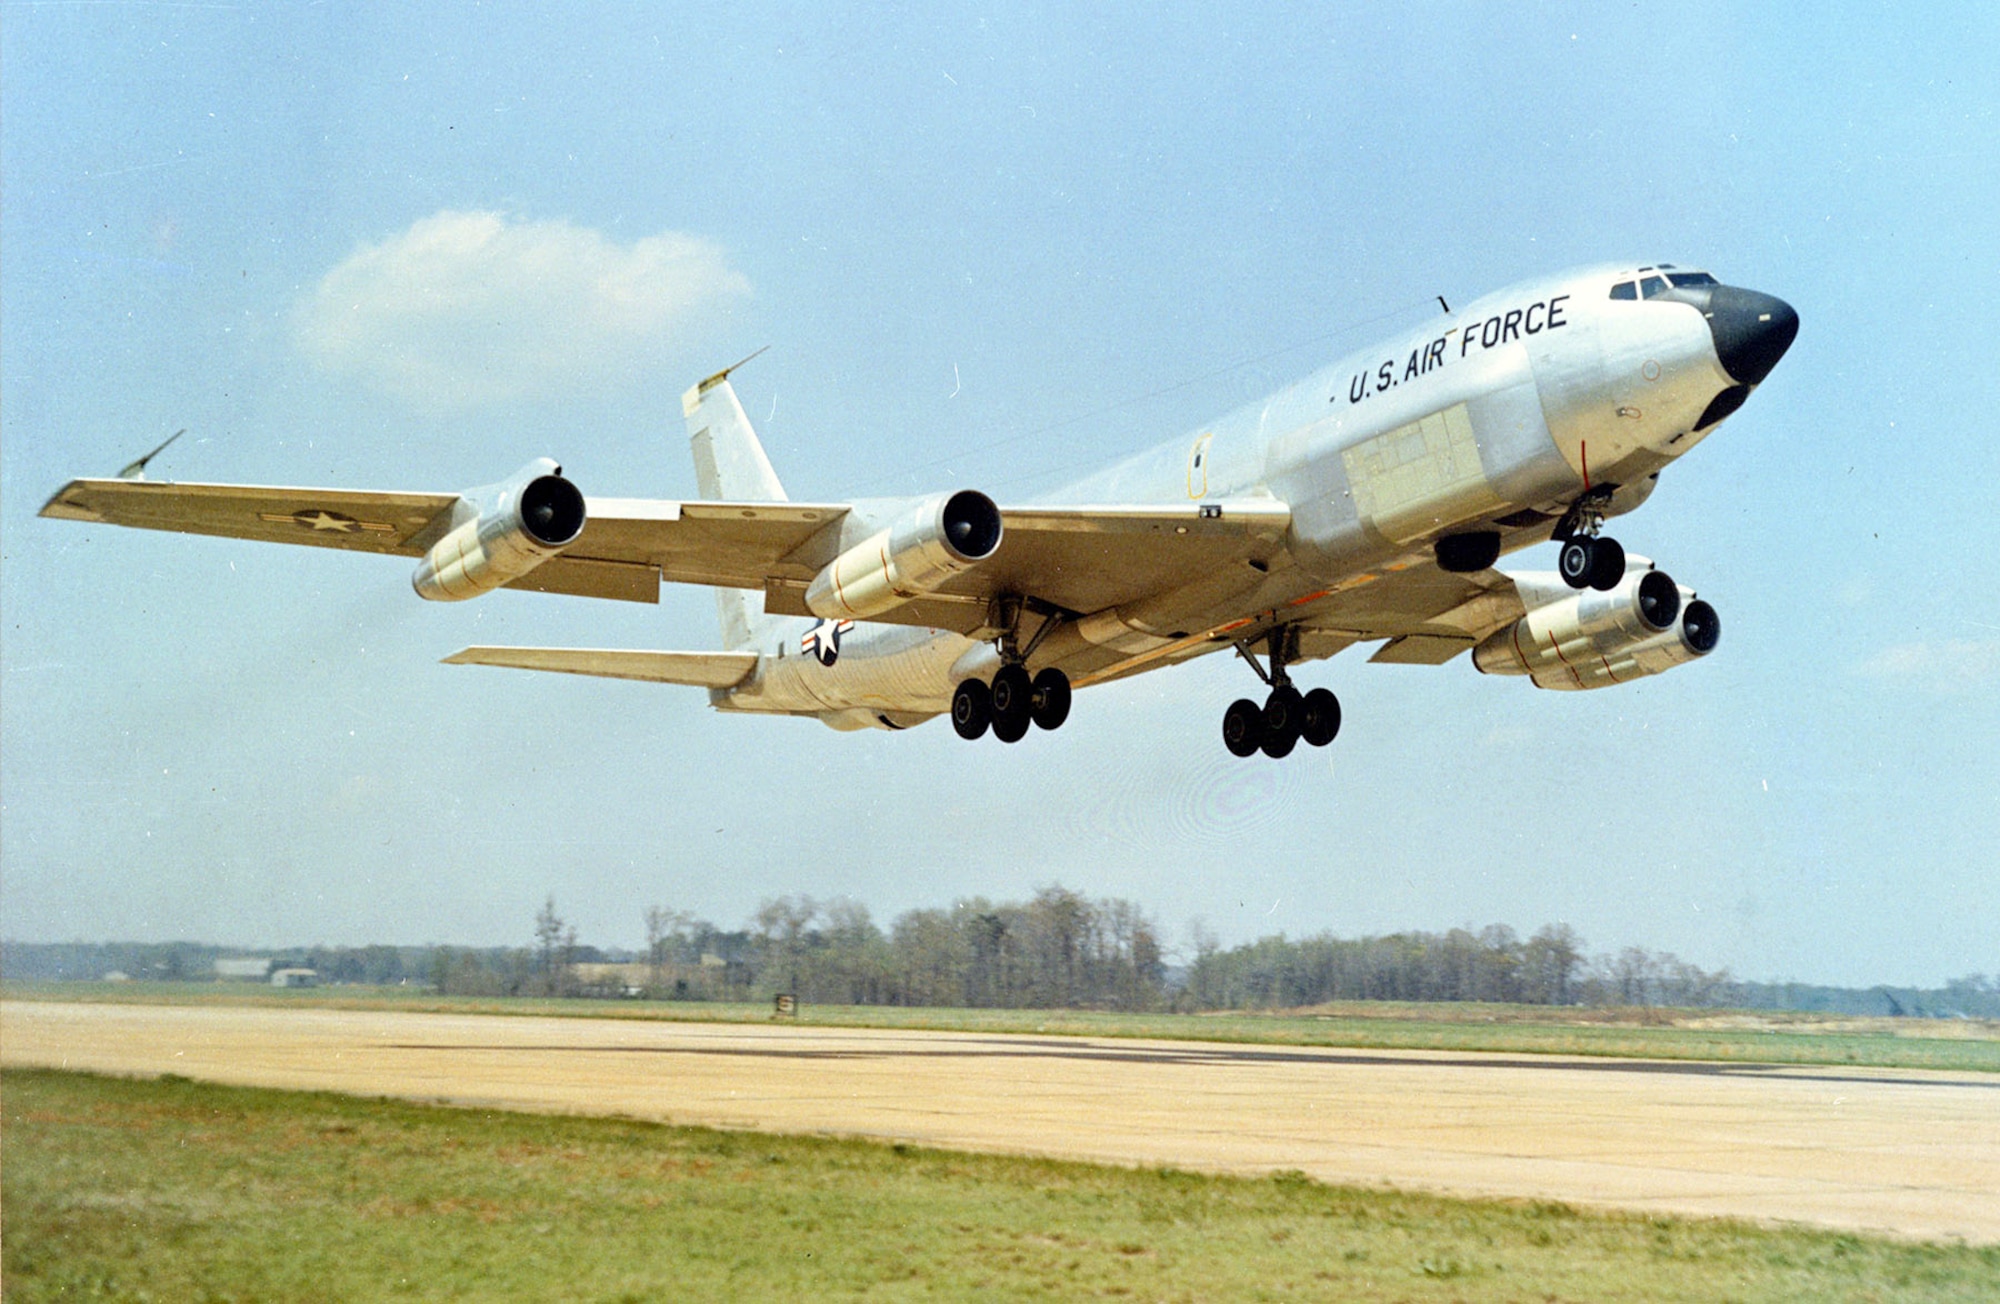 RC-135Cs played an important role in gathering electronic intelligence on North Vietnamese air defense systems. It was nicknamed the “Chipmunk” for its large “cheeks.” (U.S. Air Force photo)